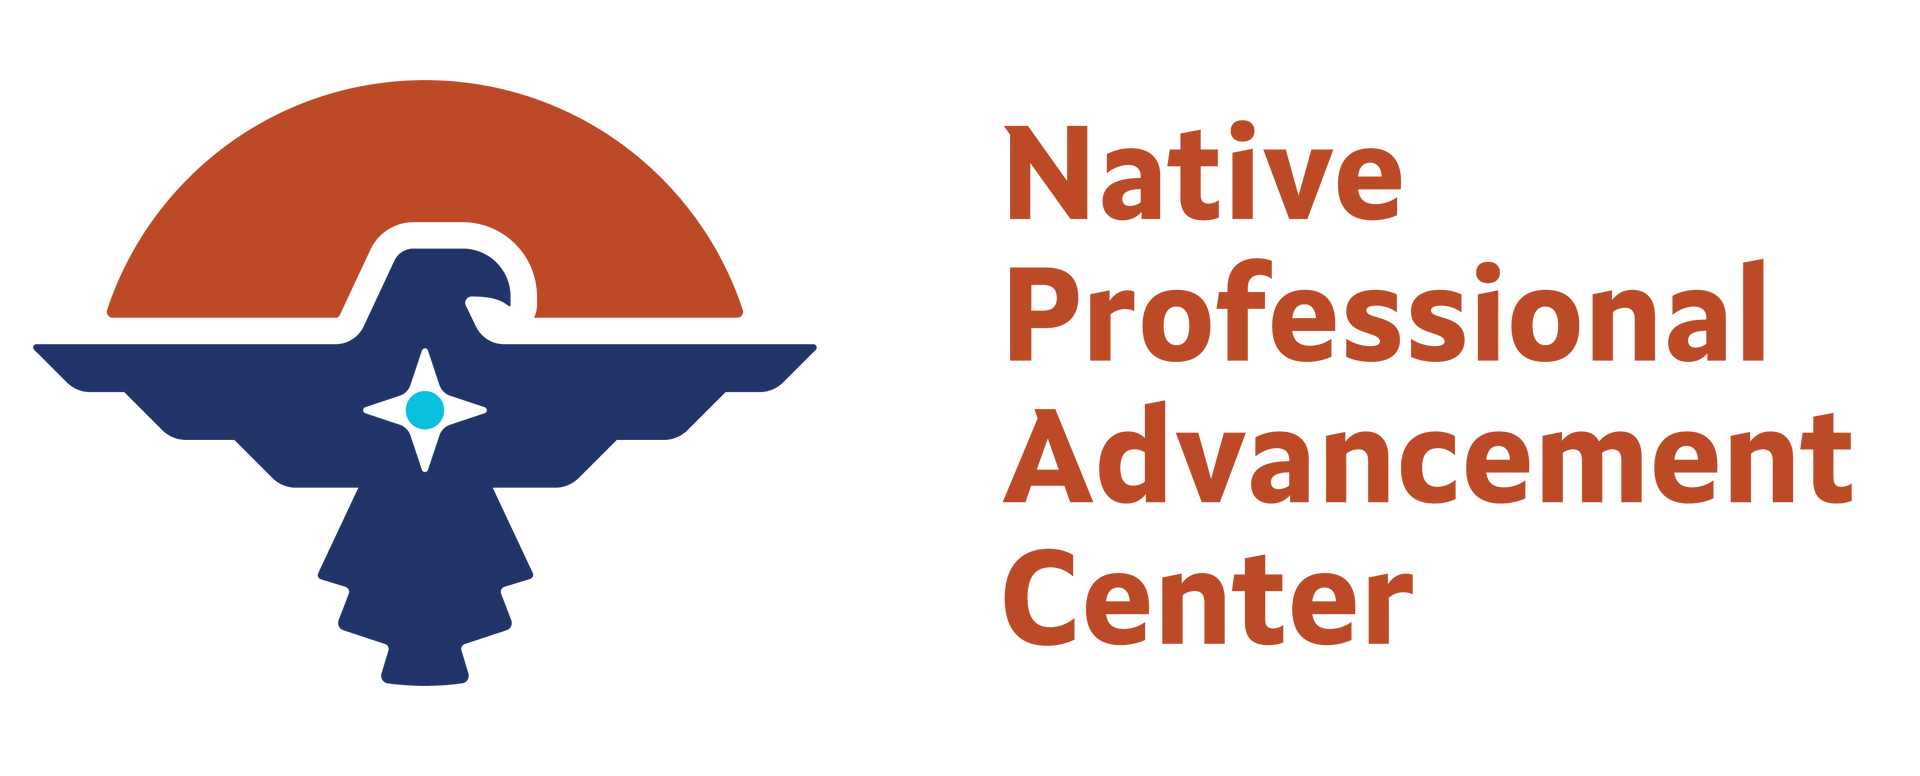 The logo for the native professional advancement center